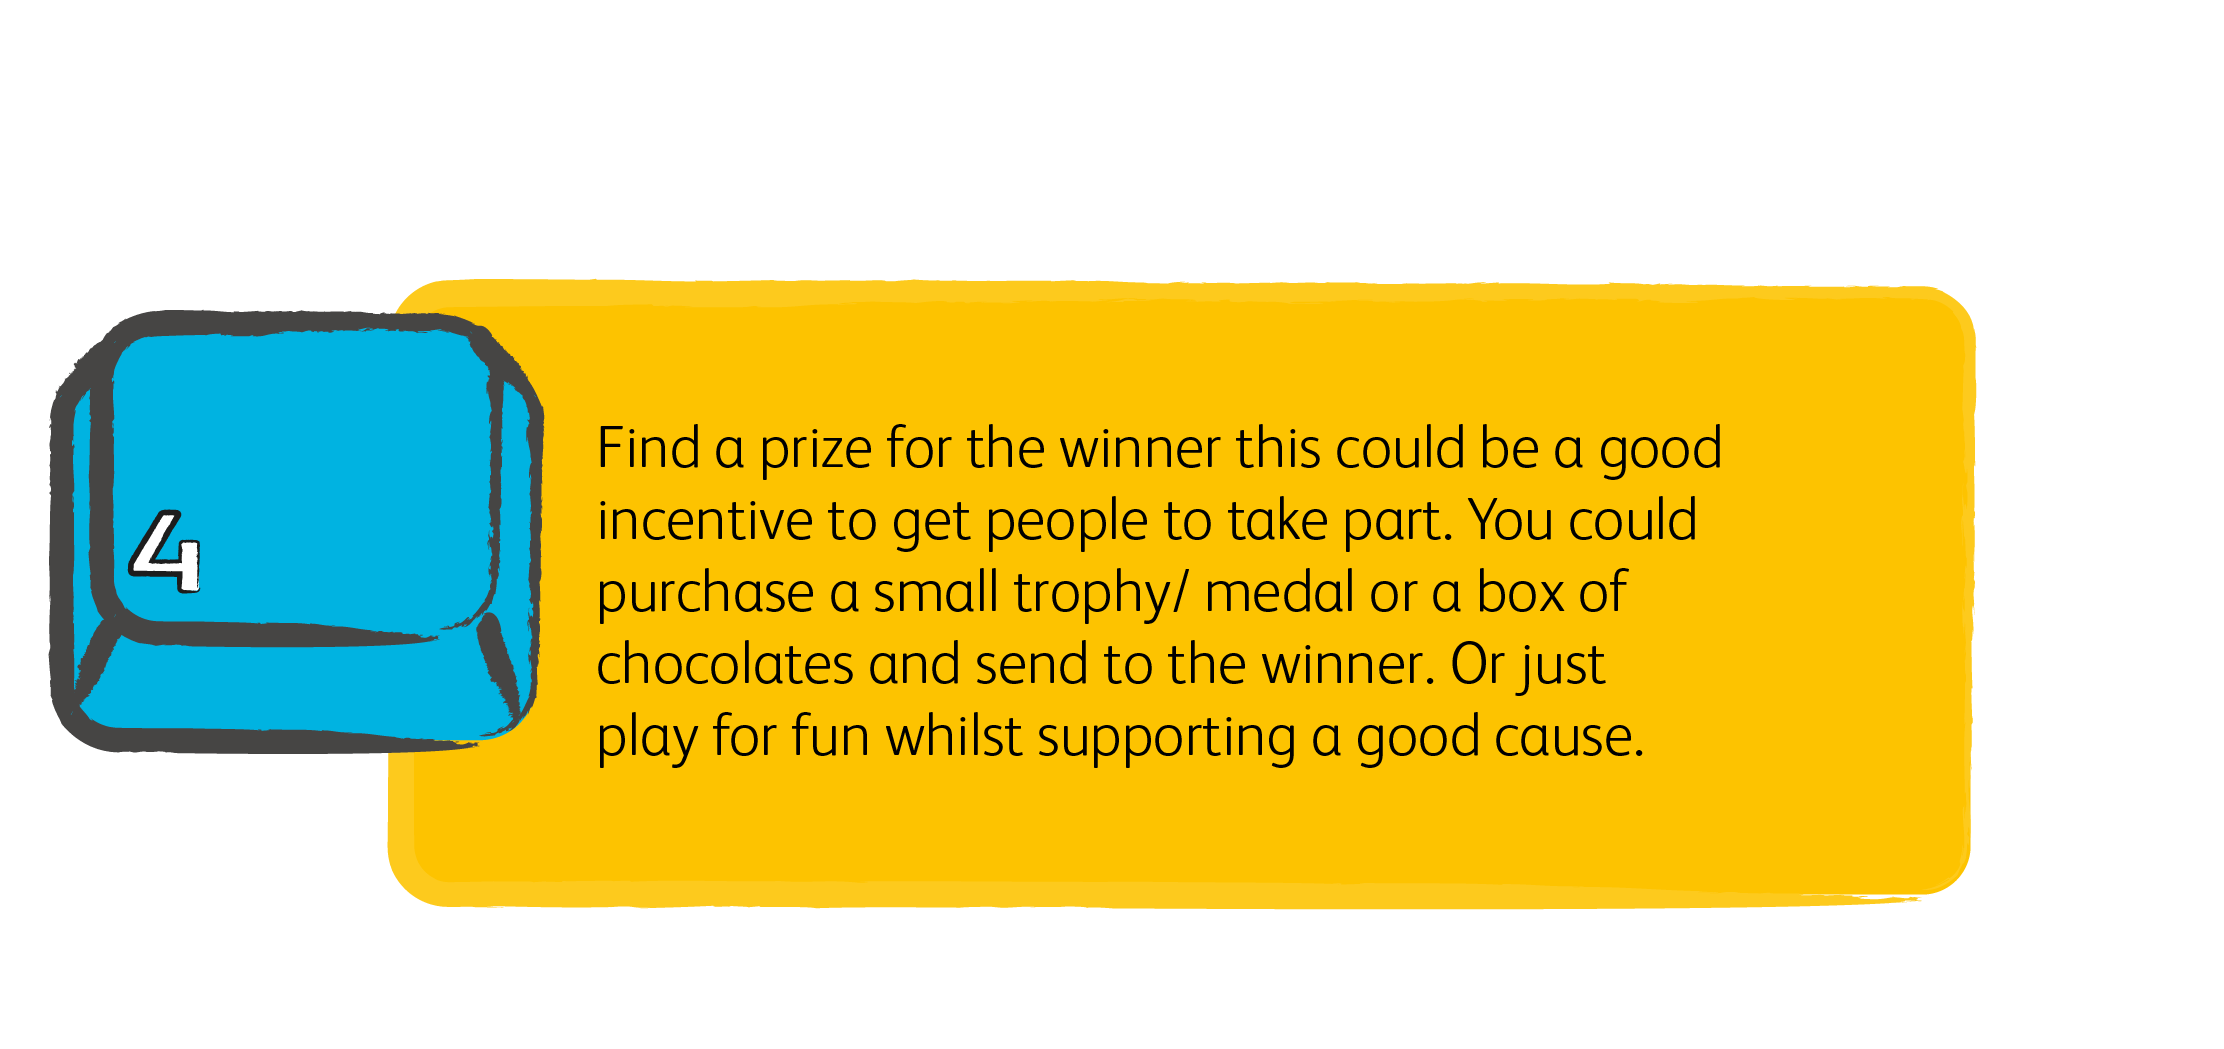 4. Find a prize for the winner this could be a good incentive to get people to take part. You could purchase a small trophy/ medal or a box of chocolates and send to the winner. Or just play for fun whilst supporting a good cause.